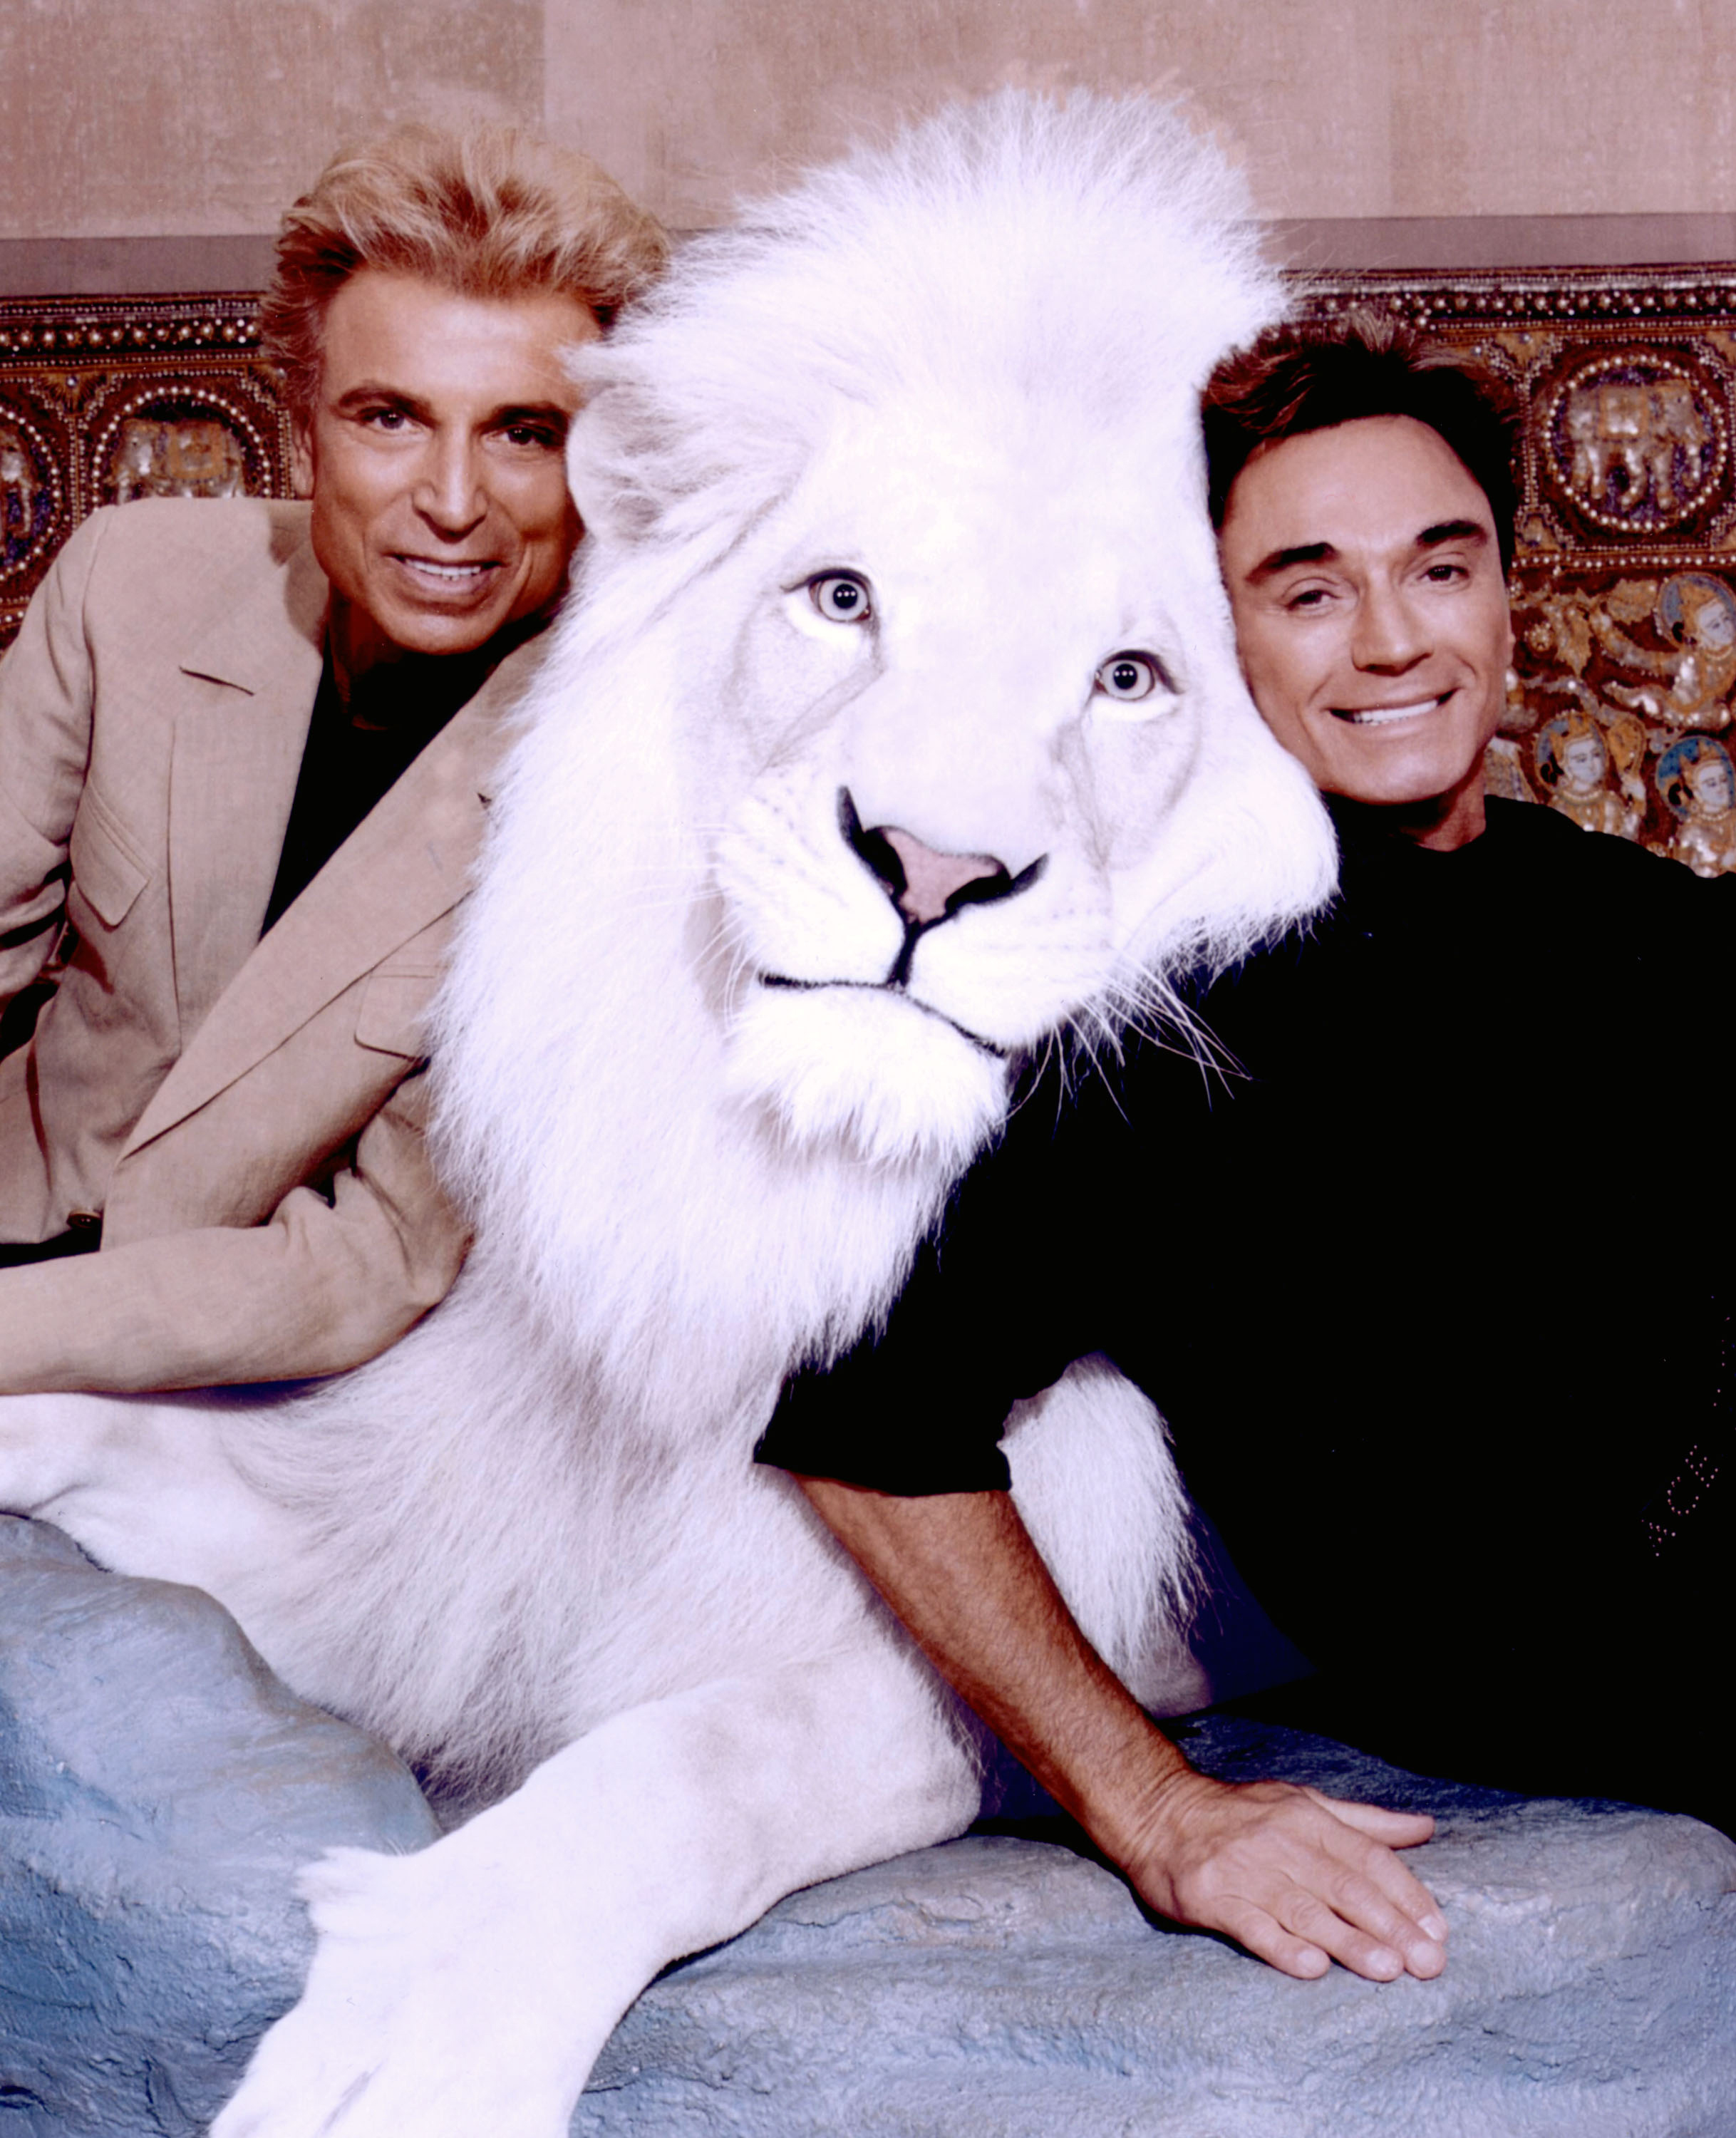 World-renowned illusionists and conservationists Siegfried & Roy pose with Pride, the Magical White Lion in this undated photo. (Siegfried & Roy—Getty Images)